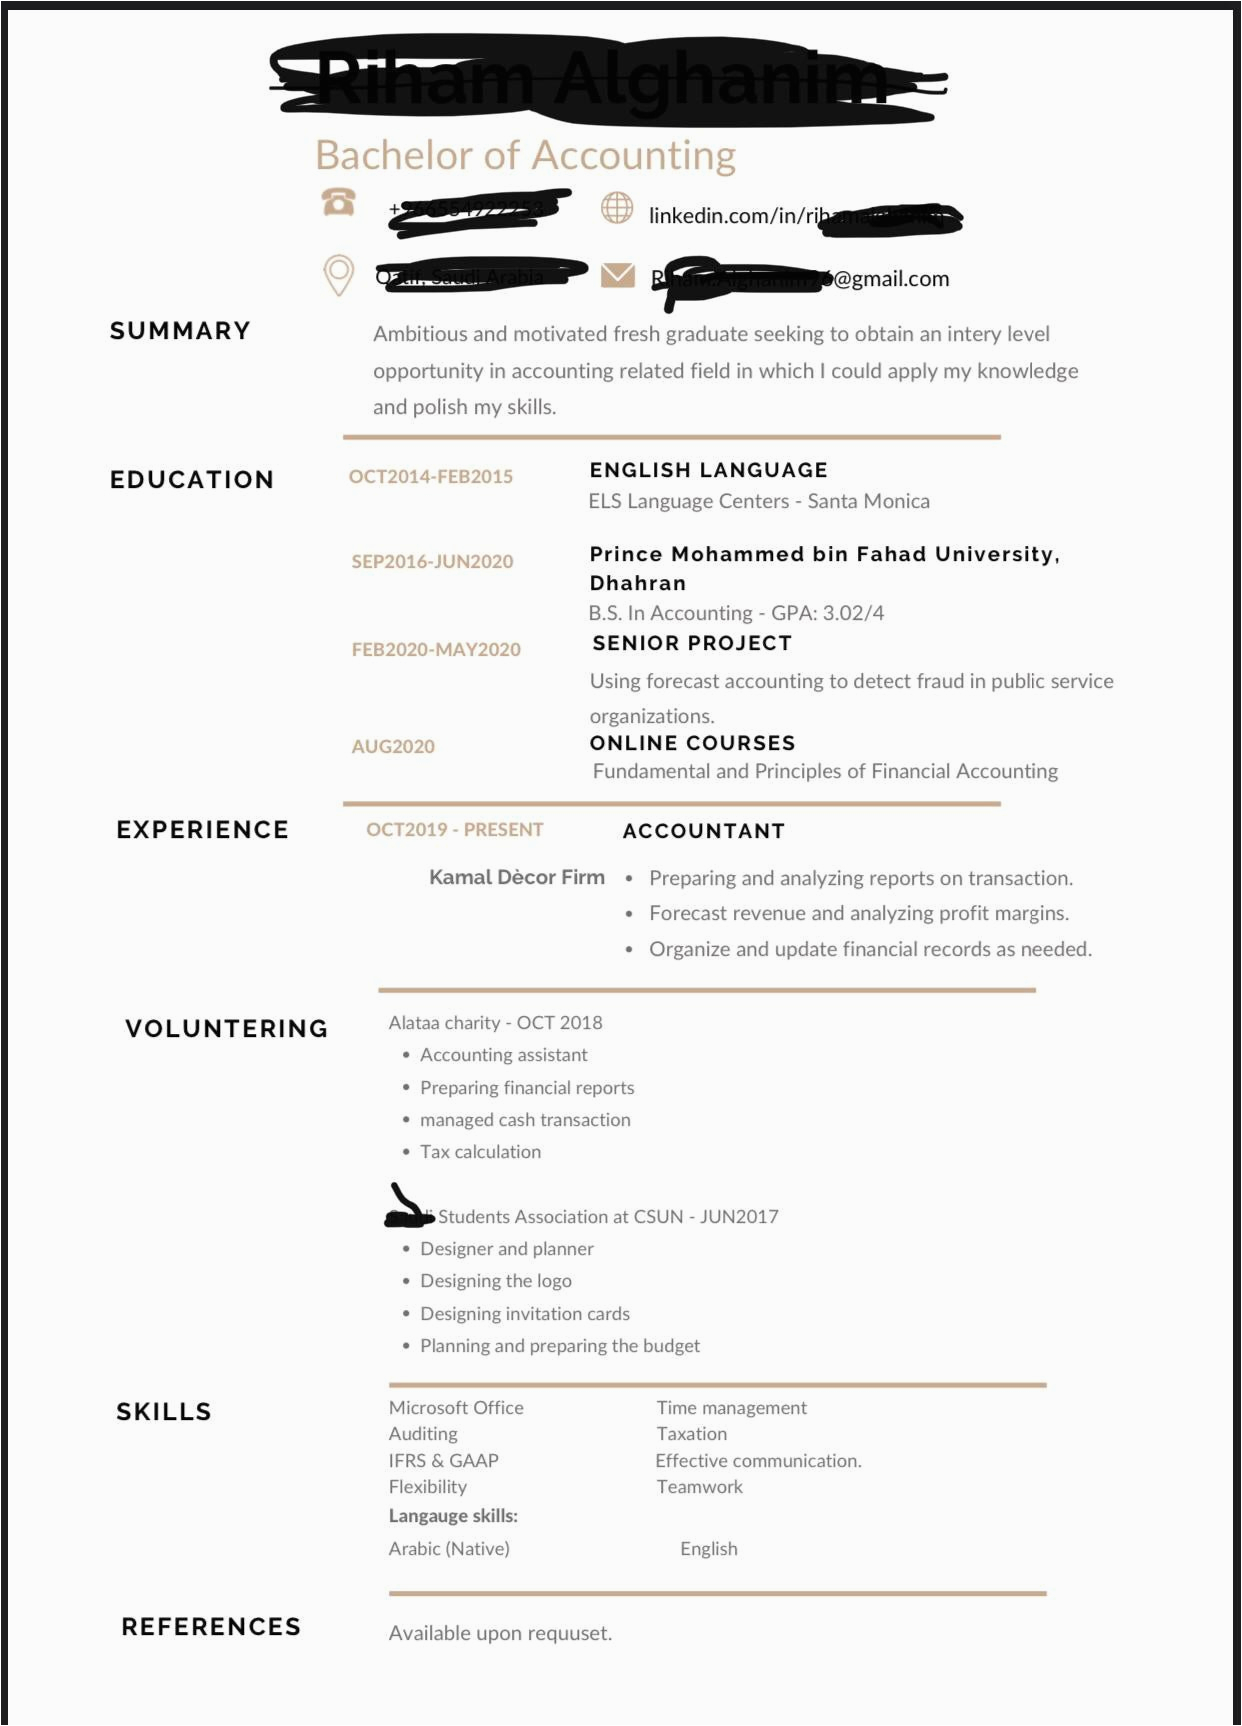 Resume Sample Applying to Big 4 Fresh Accounting Graduate Looking to Land My First Job In Big 4